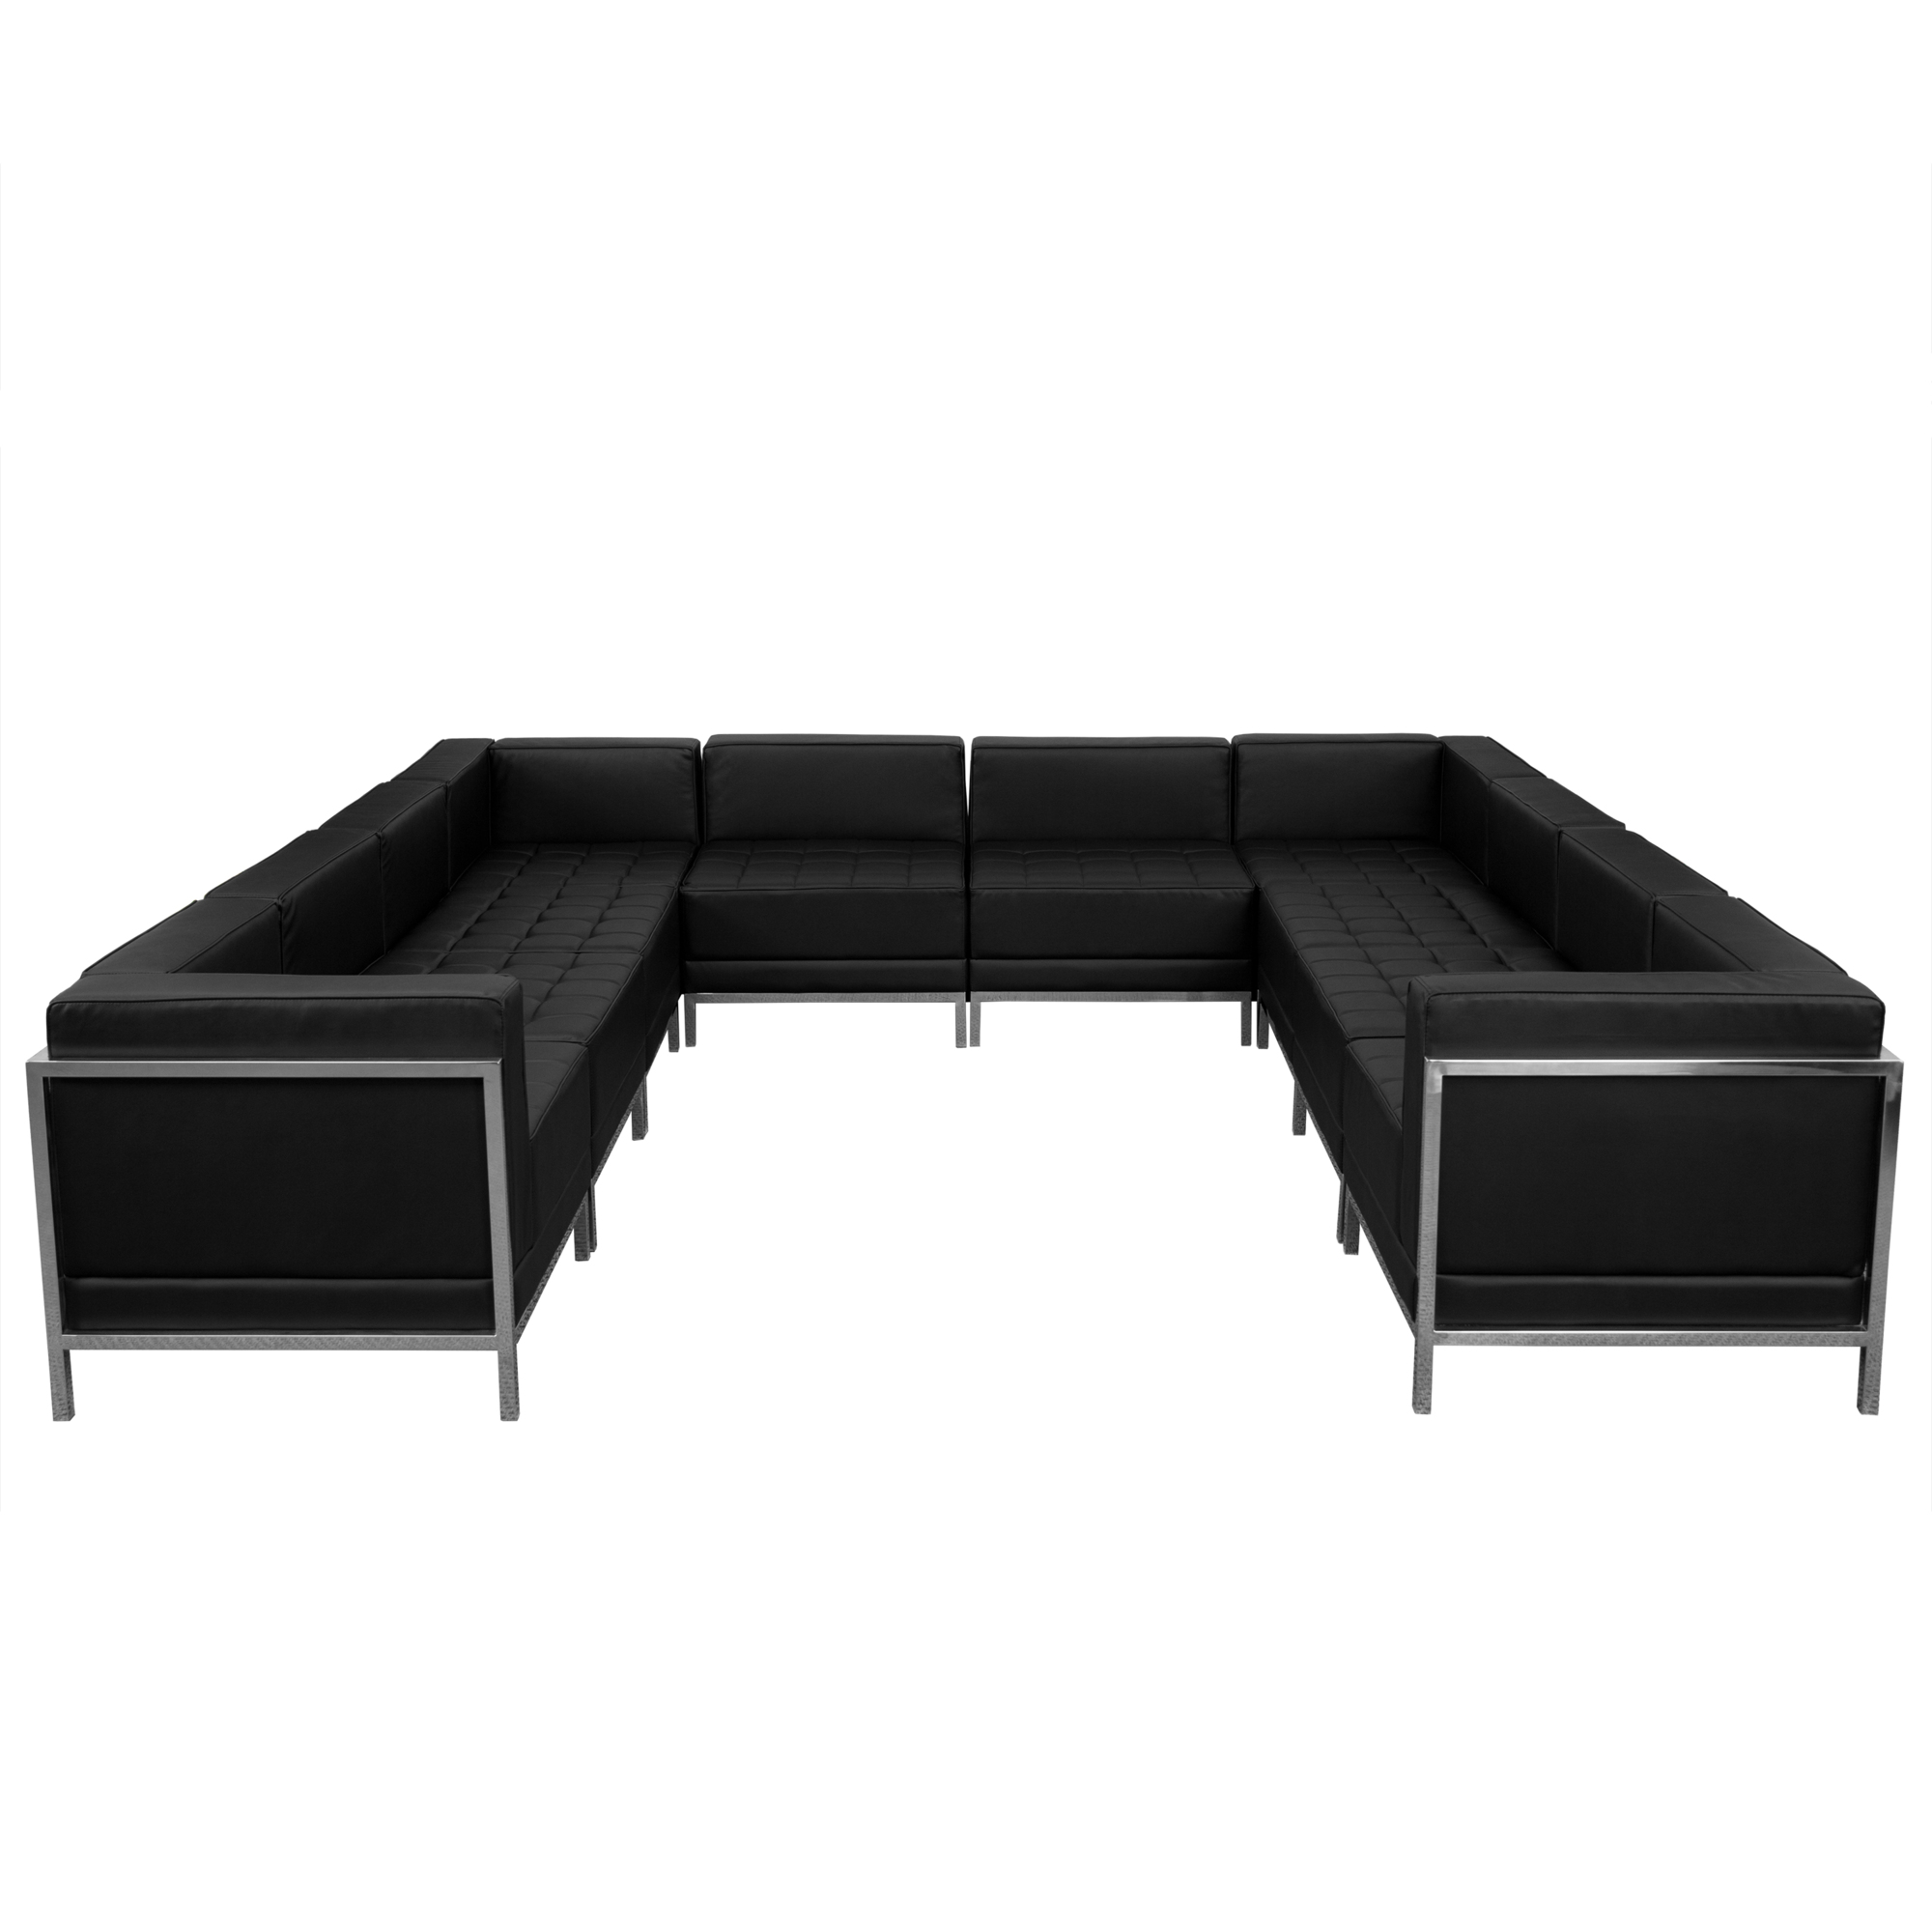 Flash Furniture, 10 PC Black LeatherSoft Modular U-Shape Sectional, Primary Color Black, Included (qty.) 10, Model ZBIMAGUSECTSET1